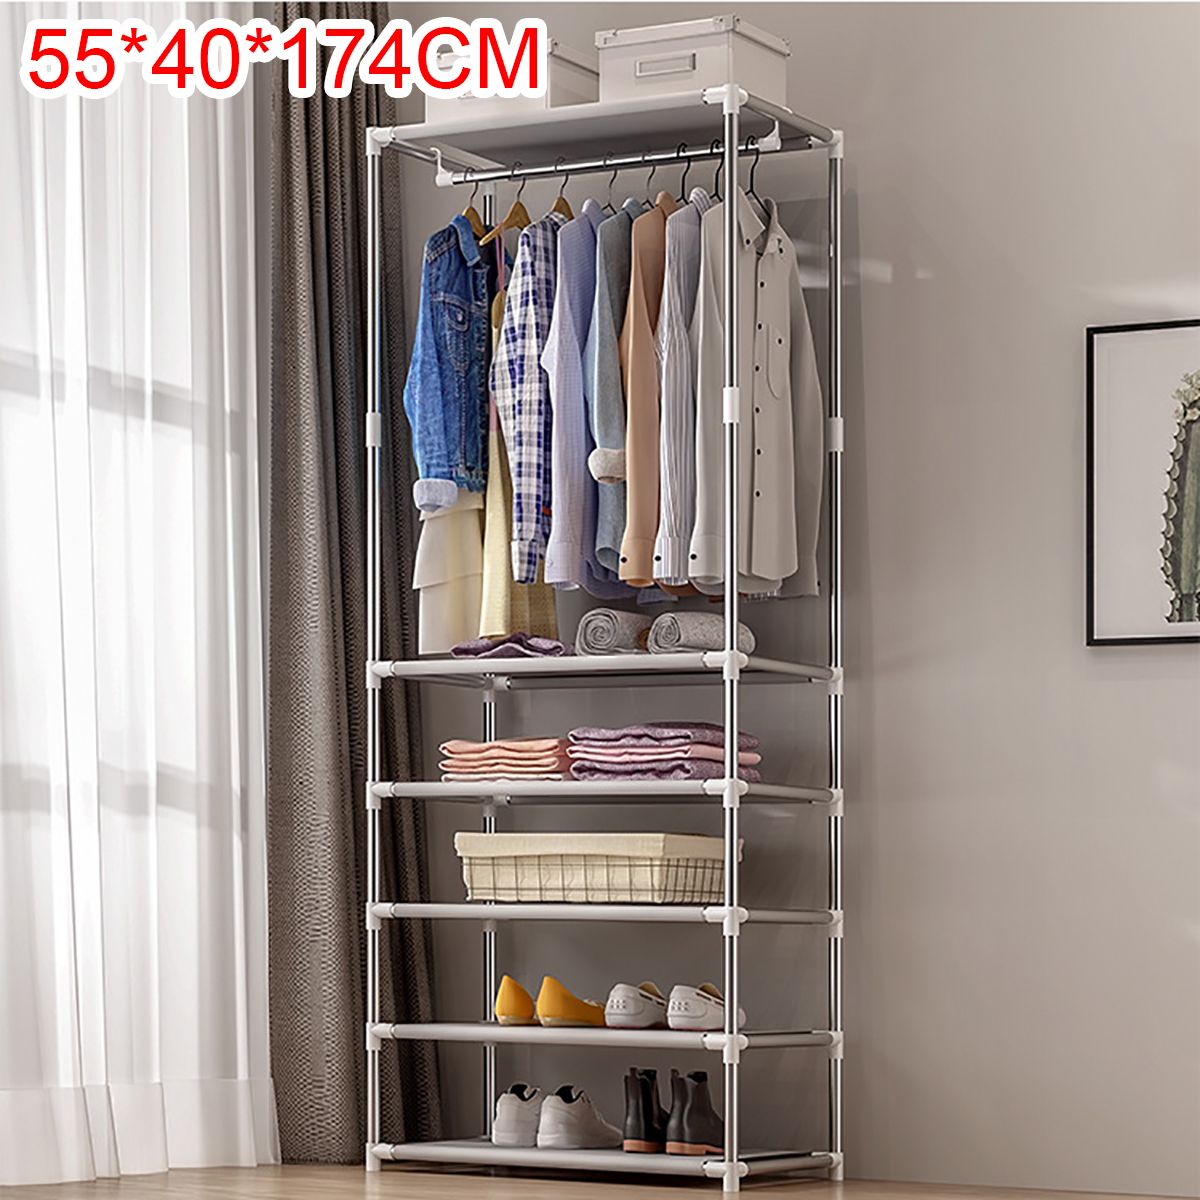 Simple Coat Rack Floor Clothes Hangers Creative Clothing Rack Shelf Easy Assembly Bedroom Hanging Clothing Racks Fashion Home Decorations 71